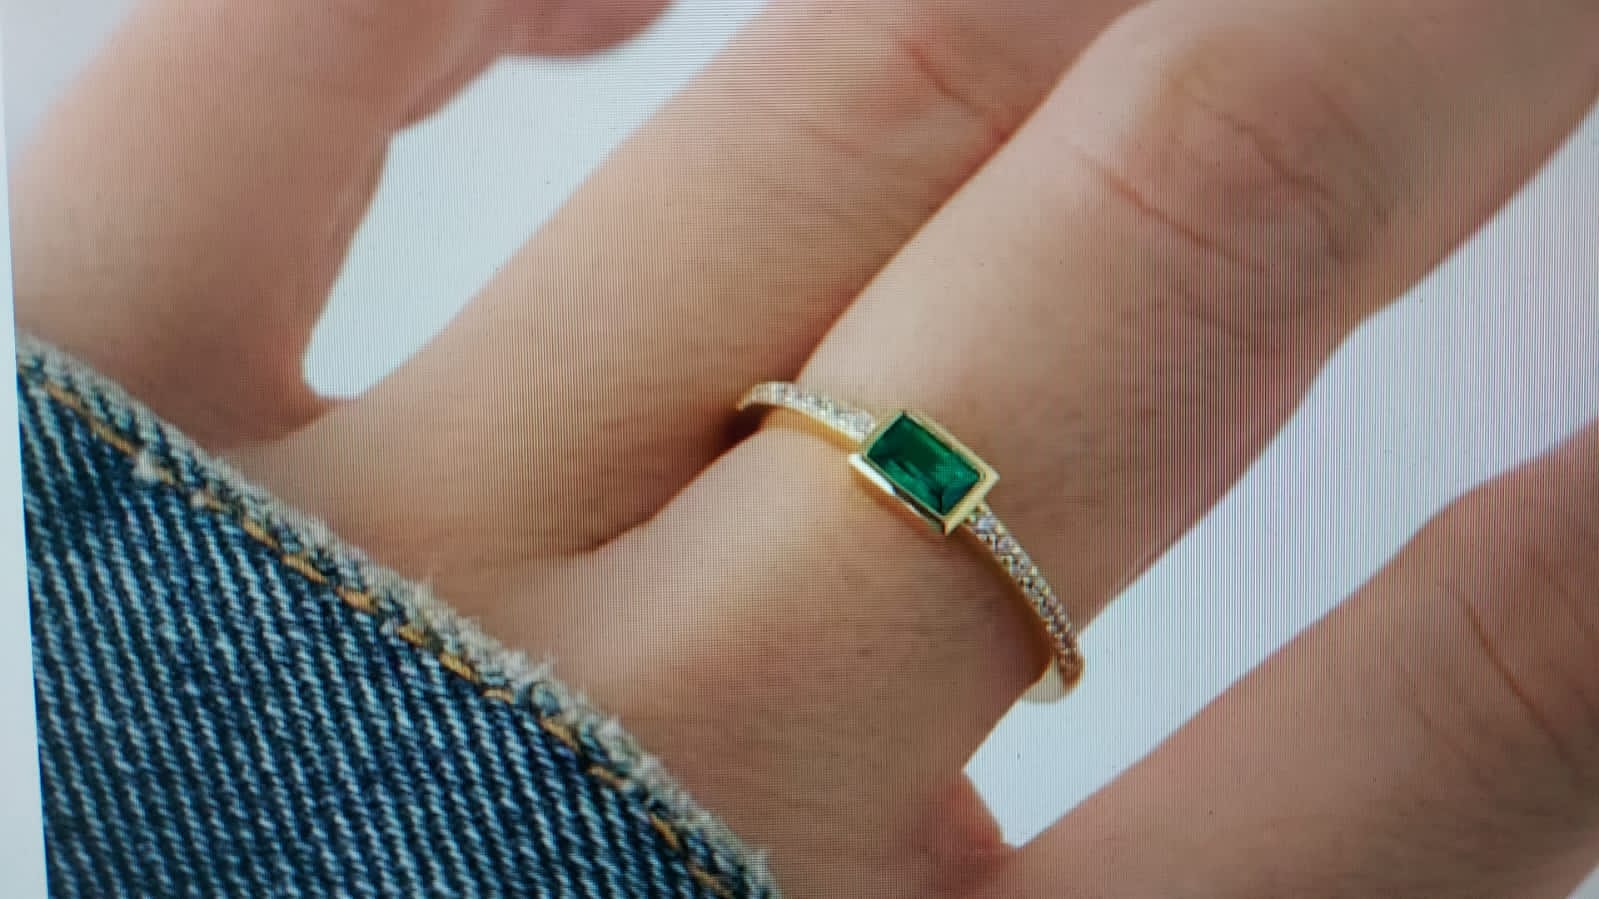 Oval Emerald Rings Online |Oval Emerald Band | STAC Fine Jewellery